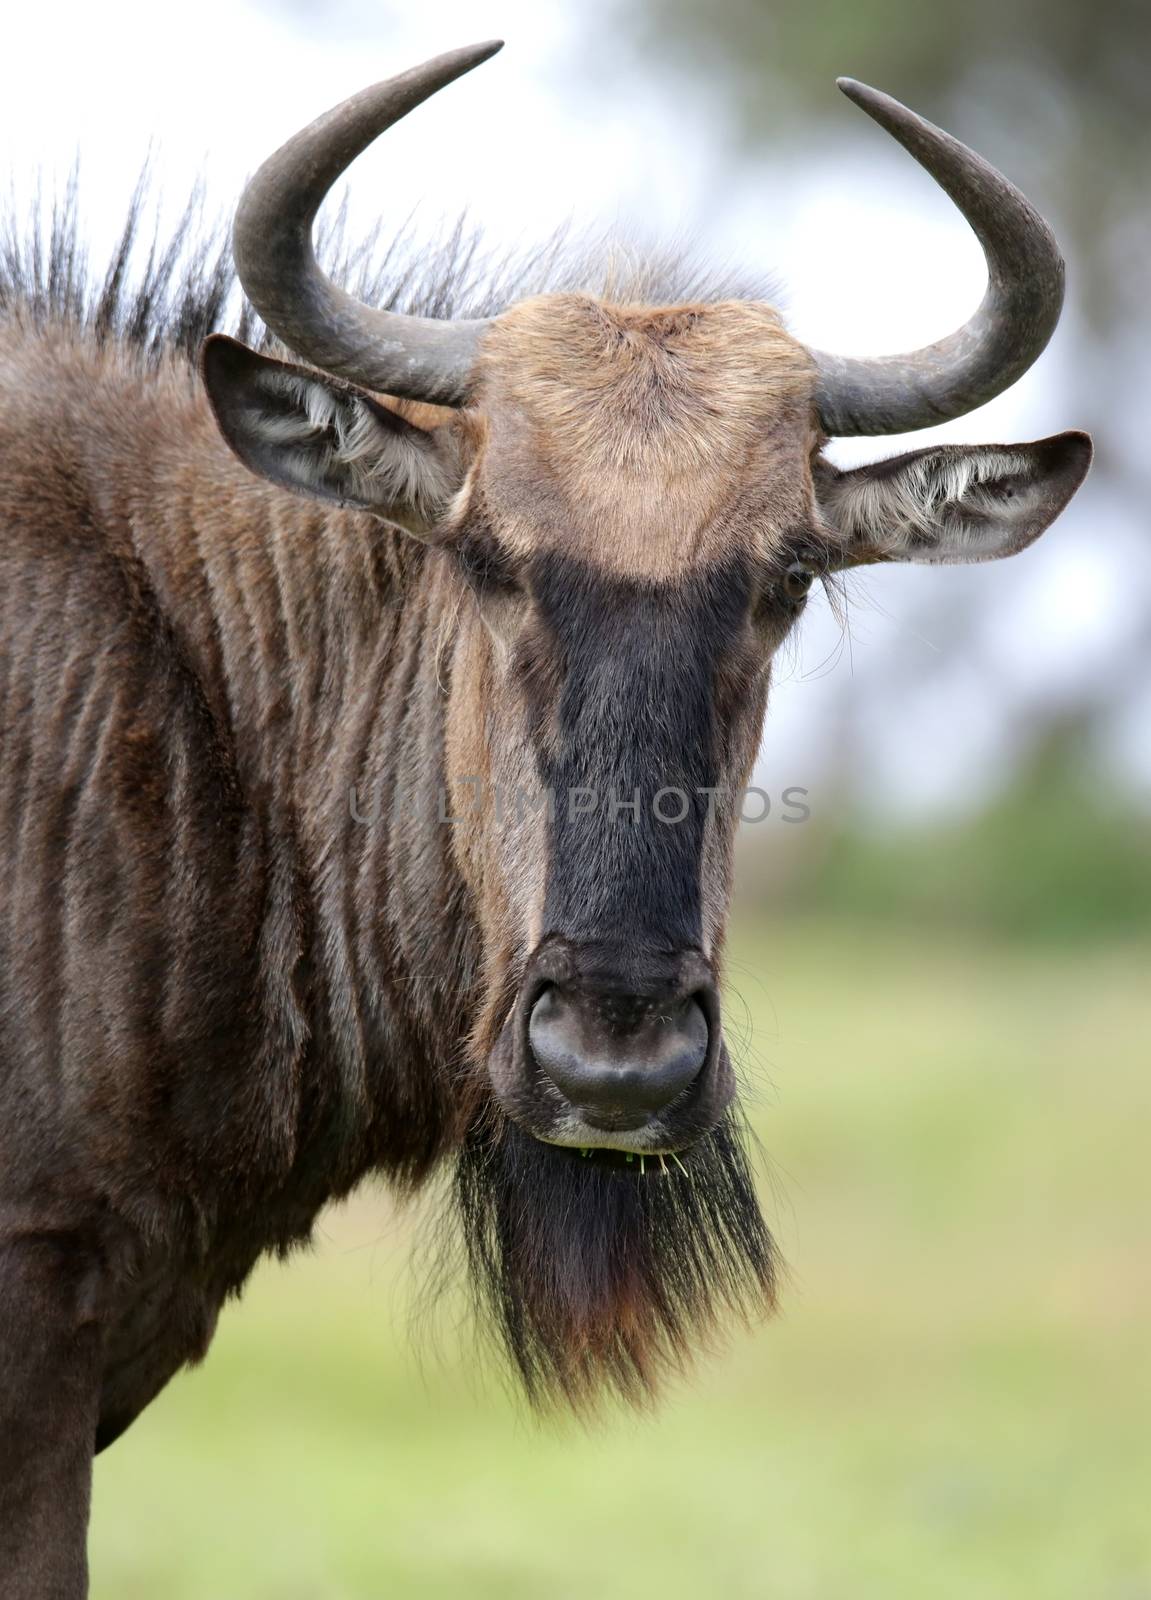 Black wildebeest antelope from Africa  with shaggy fur and horns